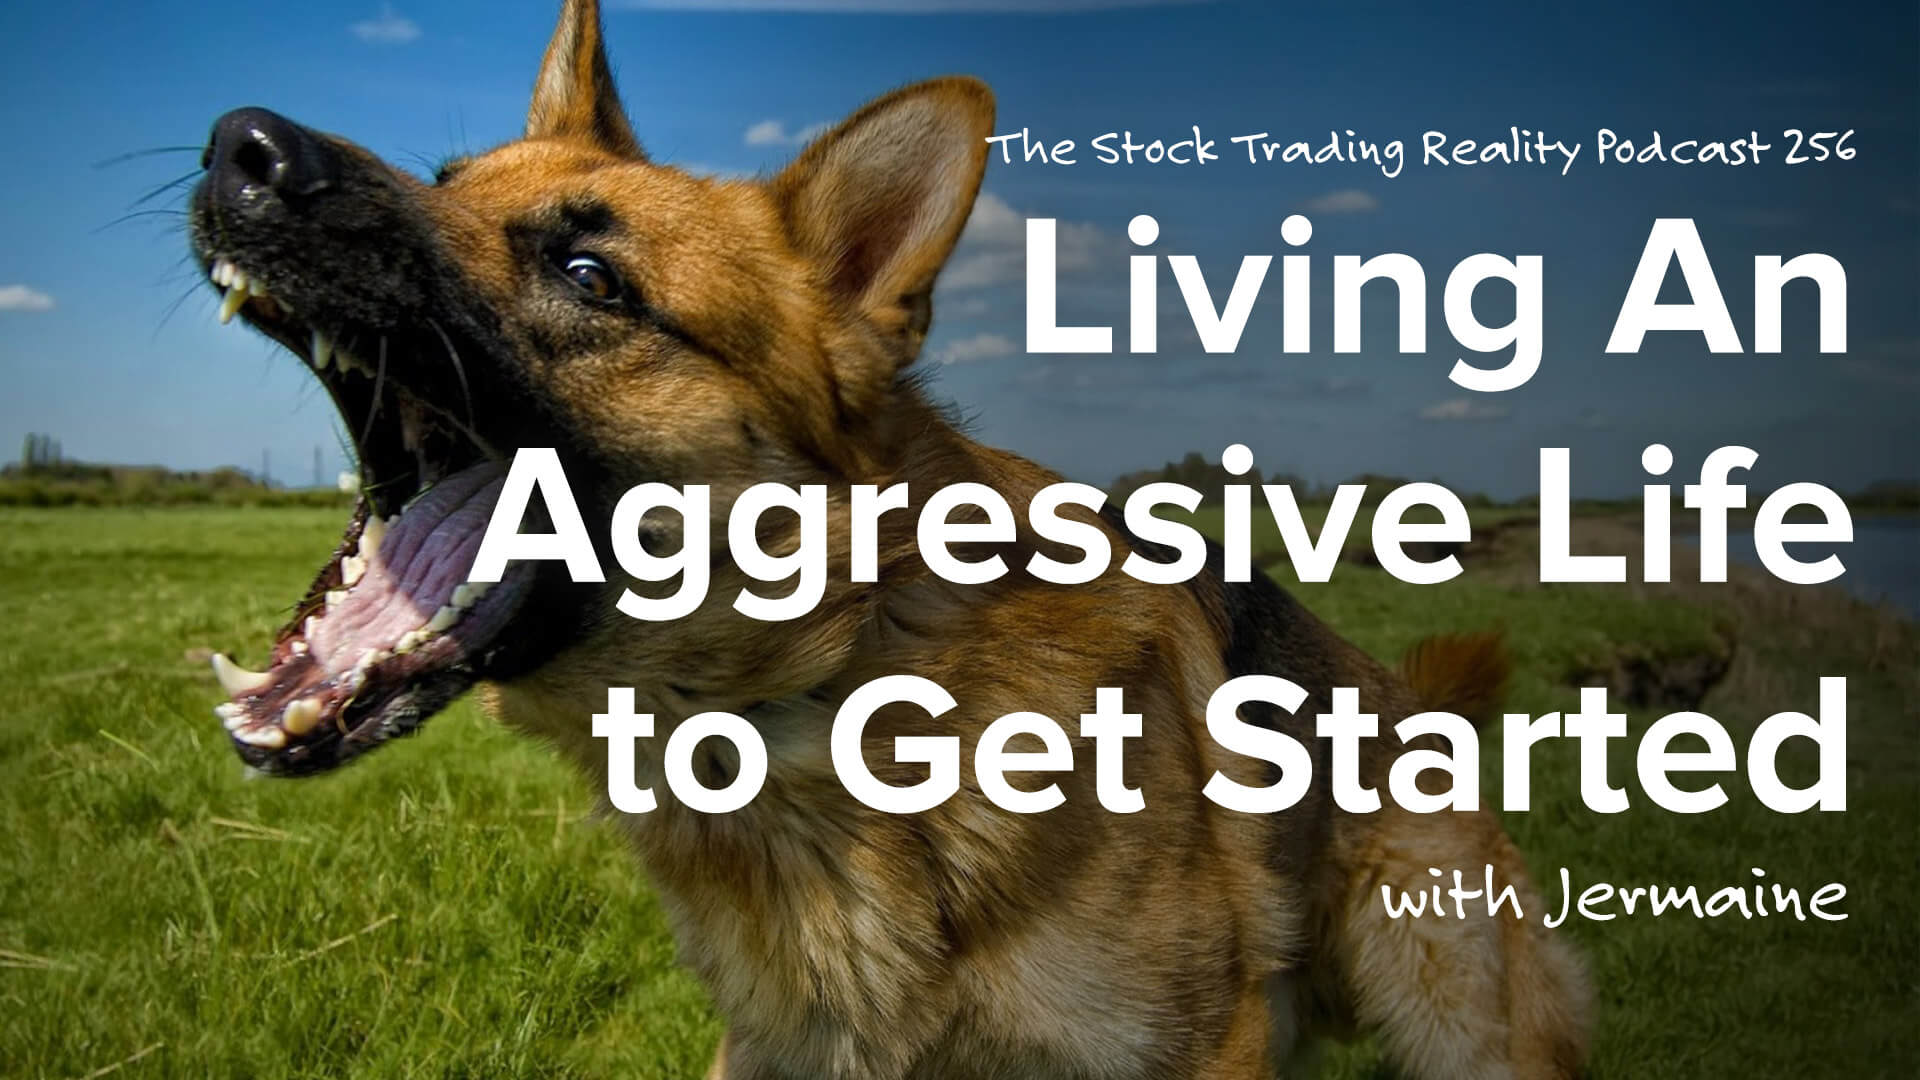 STR 256: Living An Aggressive Life to Get Started